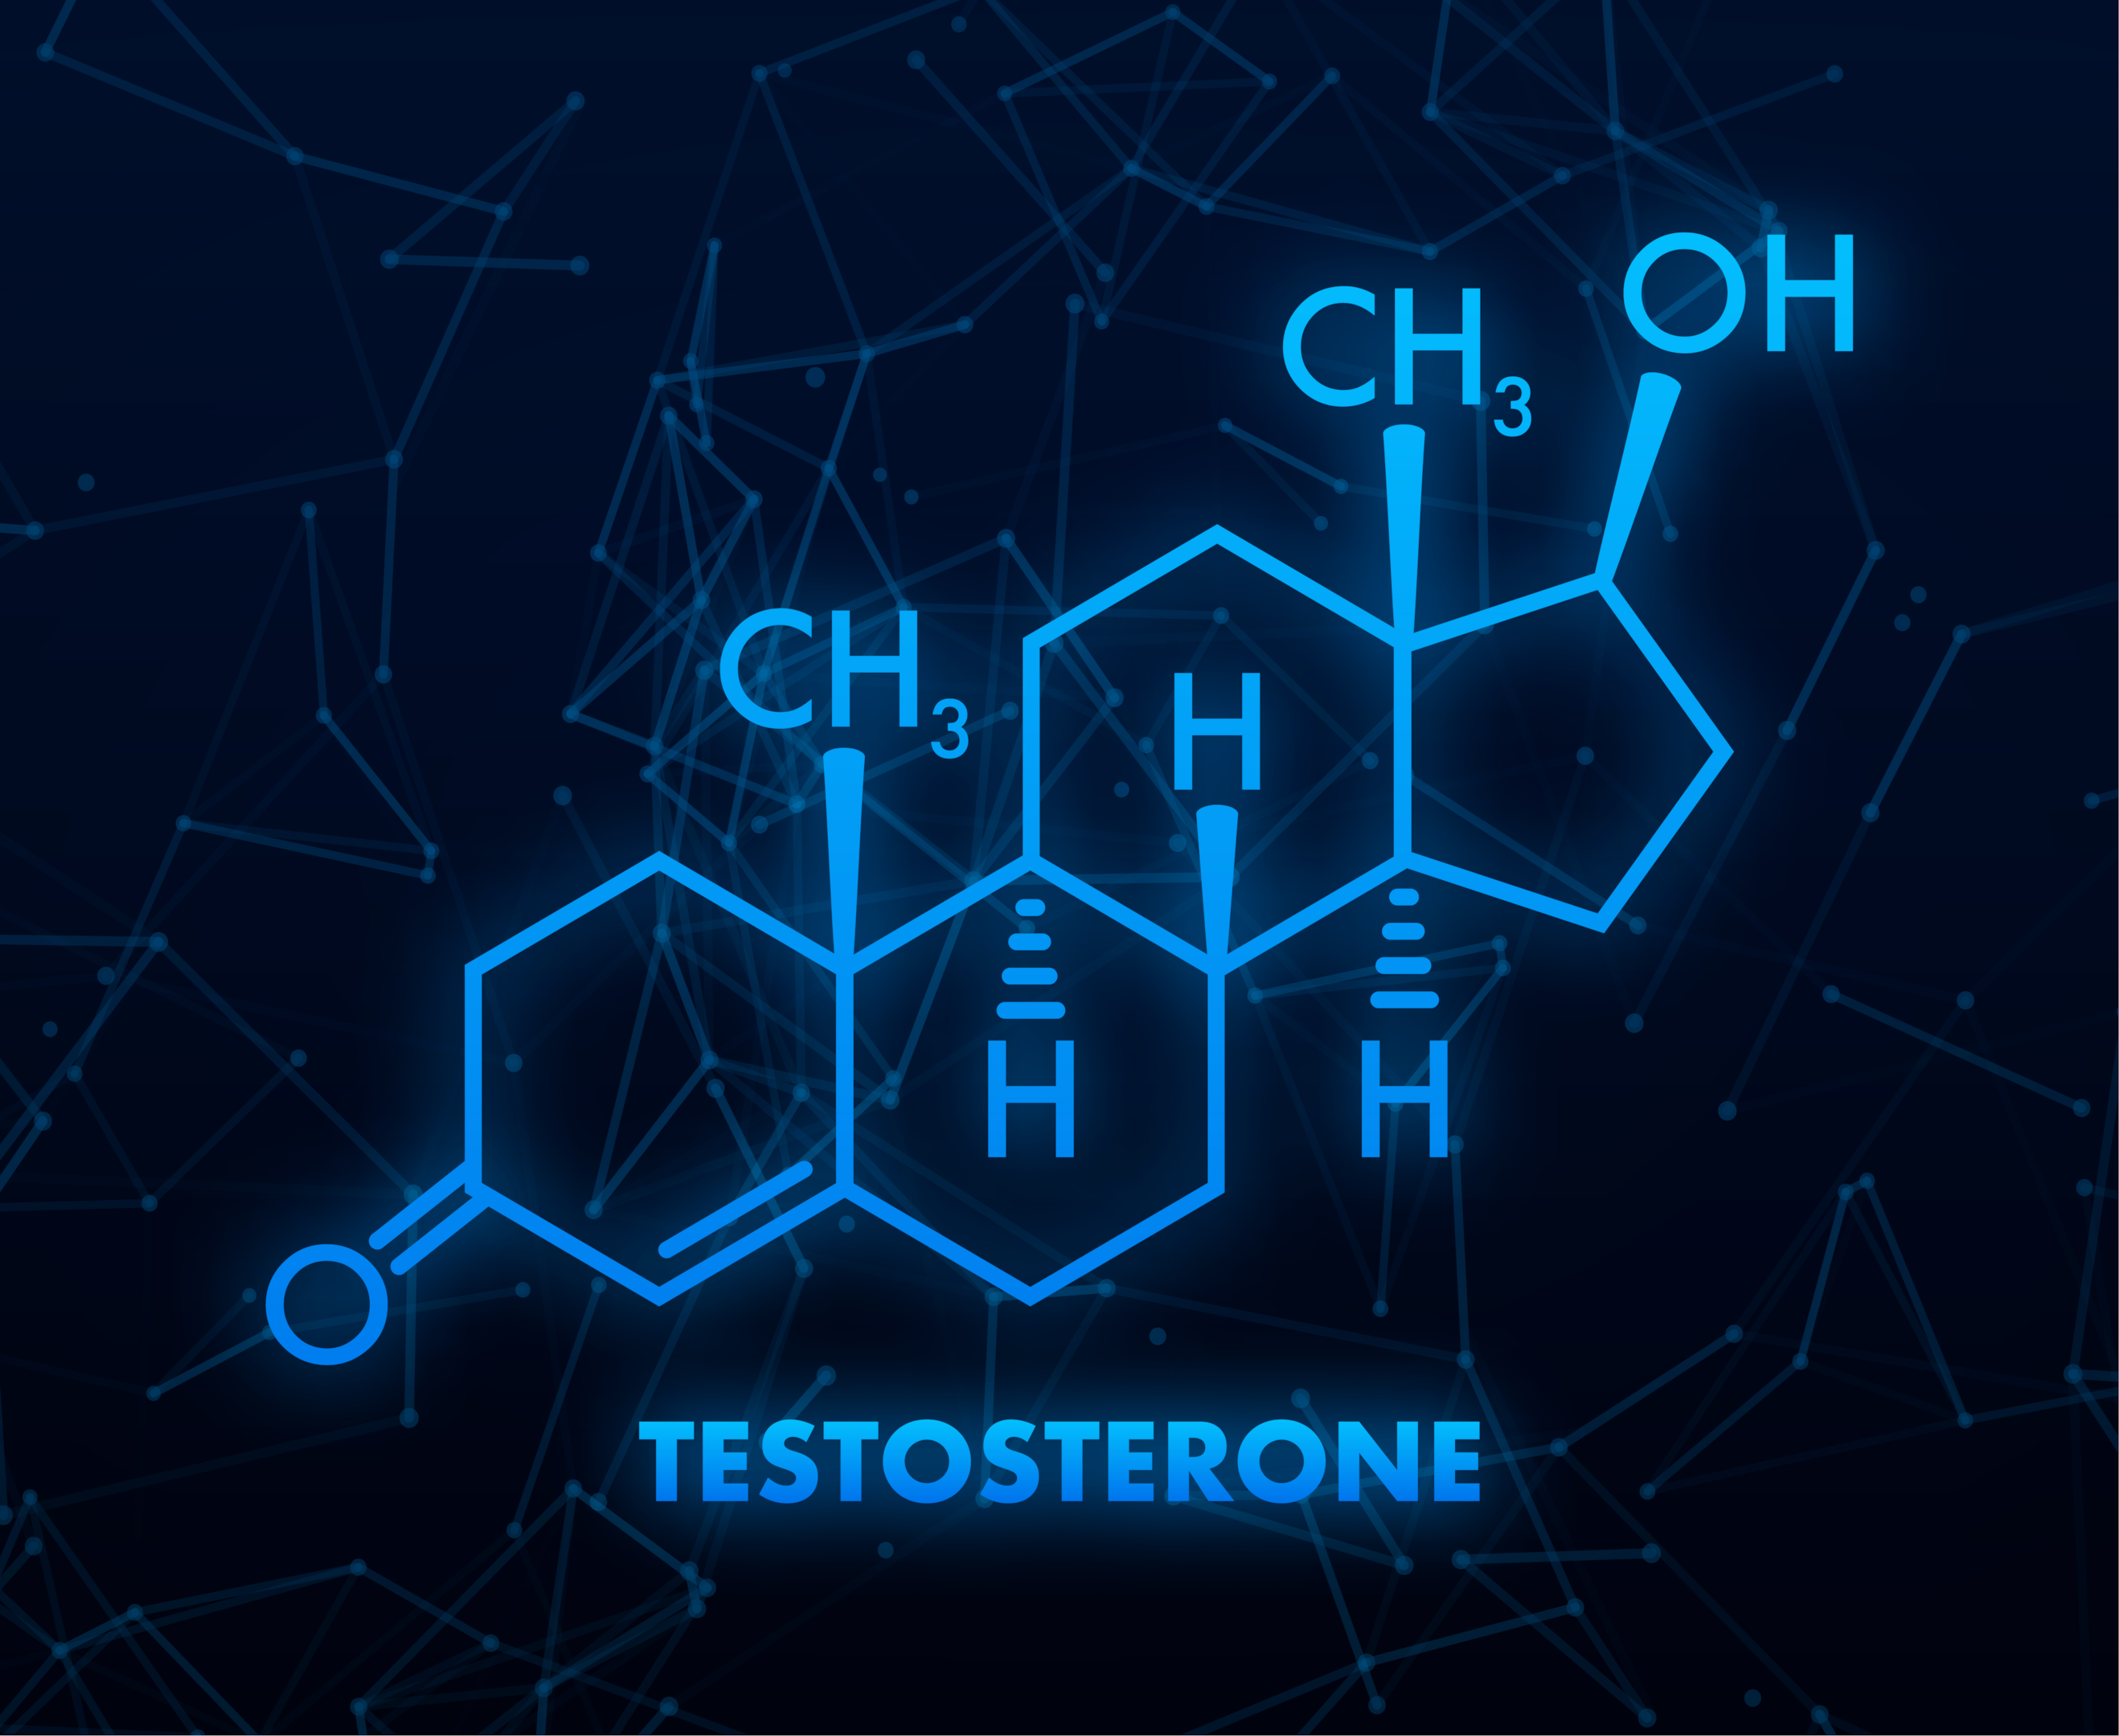 Testosterone is the main sex hormone of men.